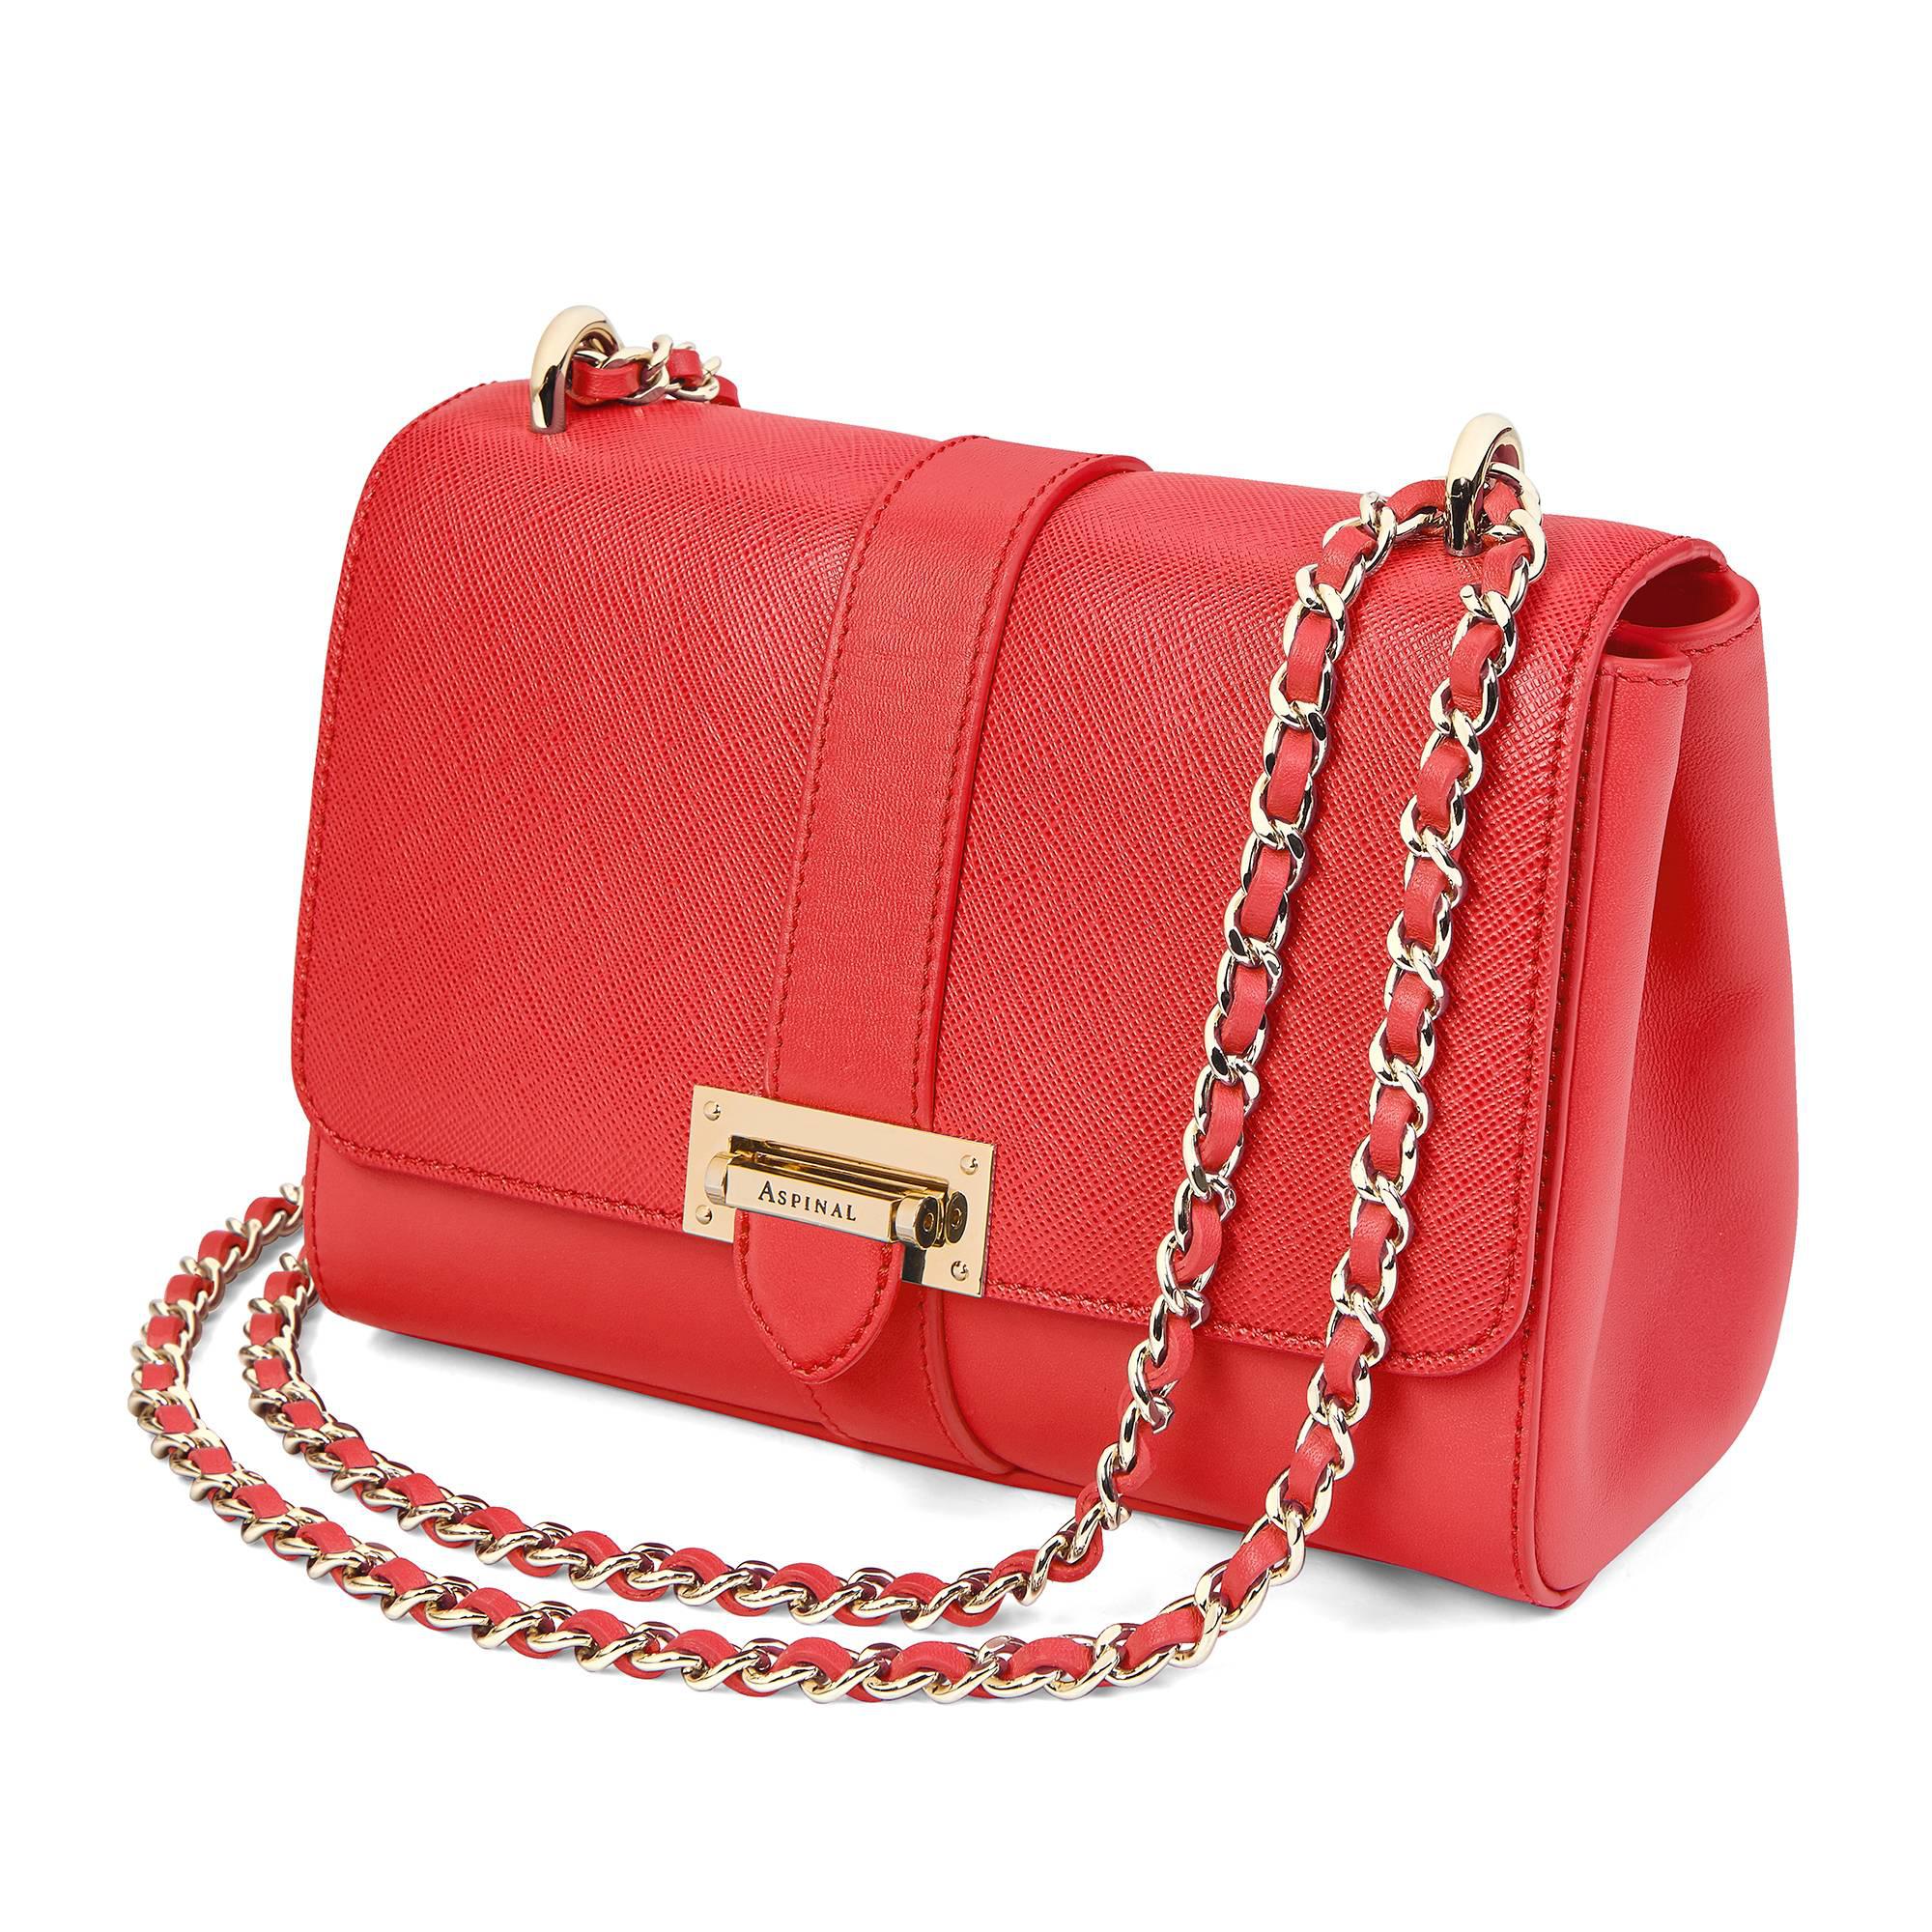 Aspinal of London Leather Micro Lottie Bag in Scarlet (Red) - Lyst